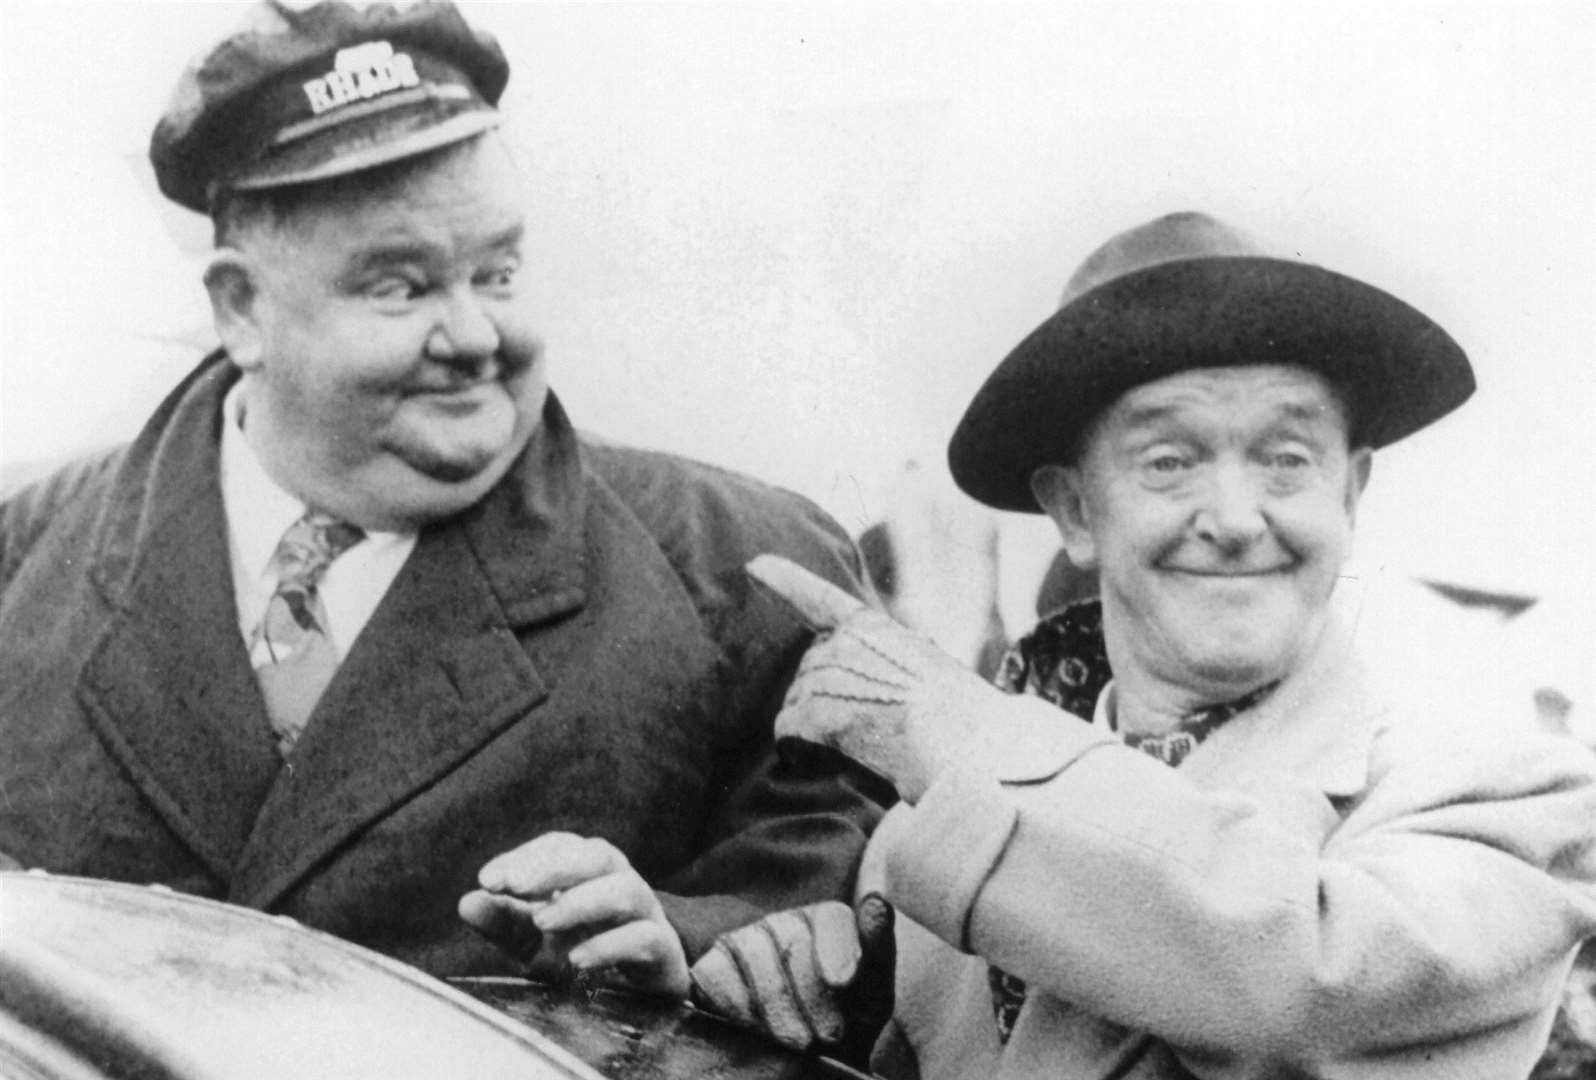 Oliver Hardy and Stan Laurel, pictured at the post war re-opening of the Romney, Hythe & Dymchurch Railway, played at the Winter Gardens in the same year, 1947